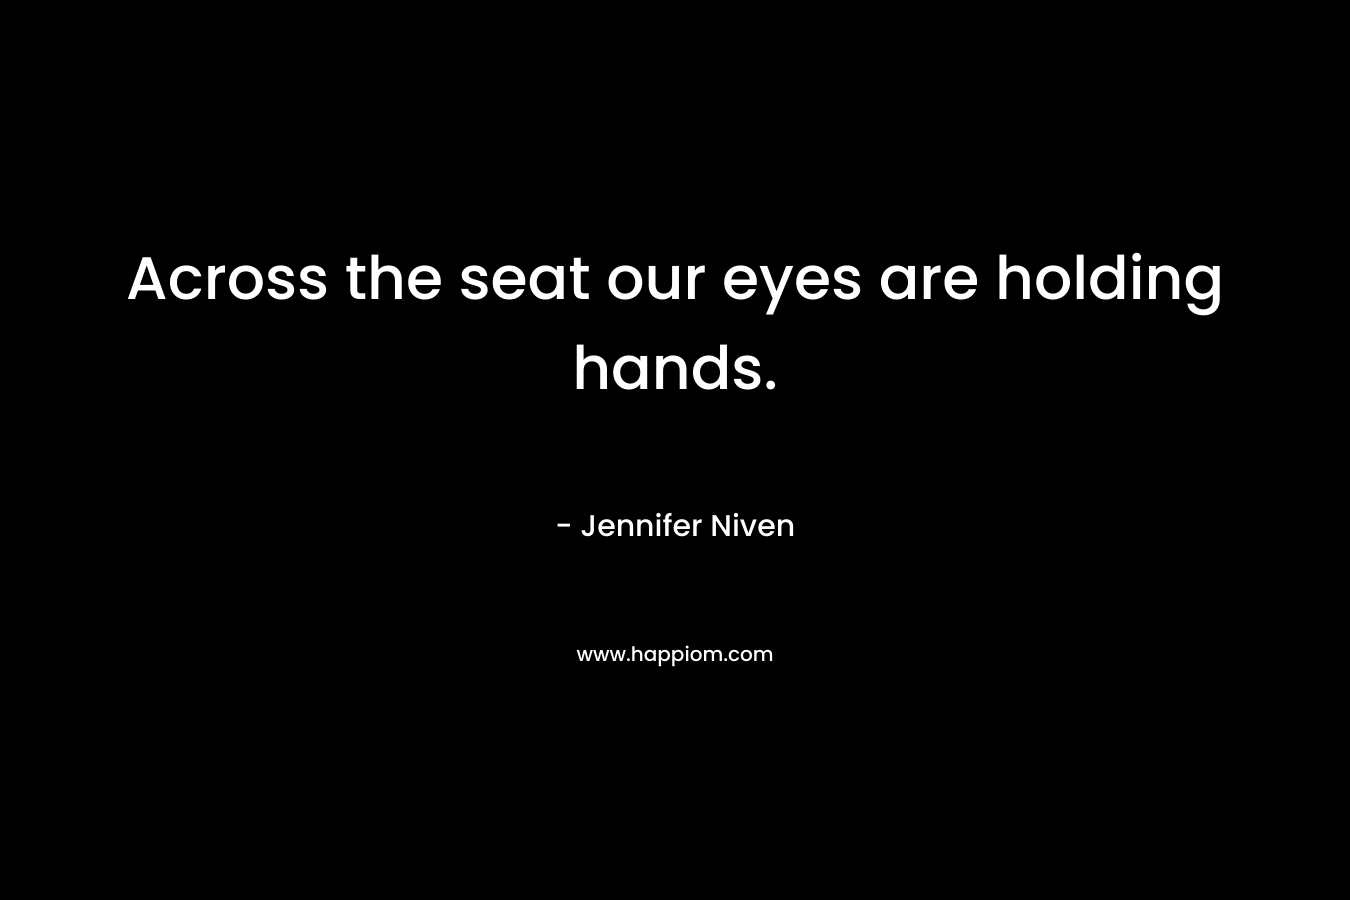 Across the seat our eyes are holding hands. – Jennifer Niven